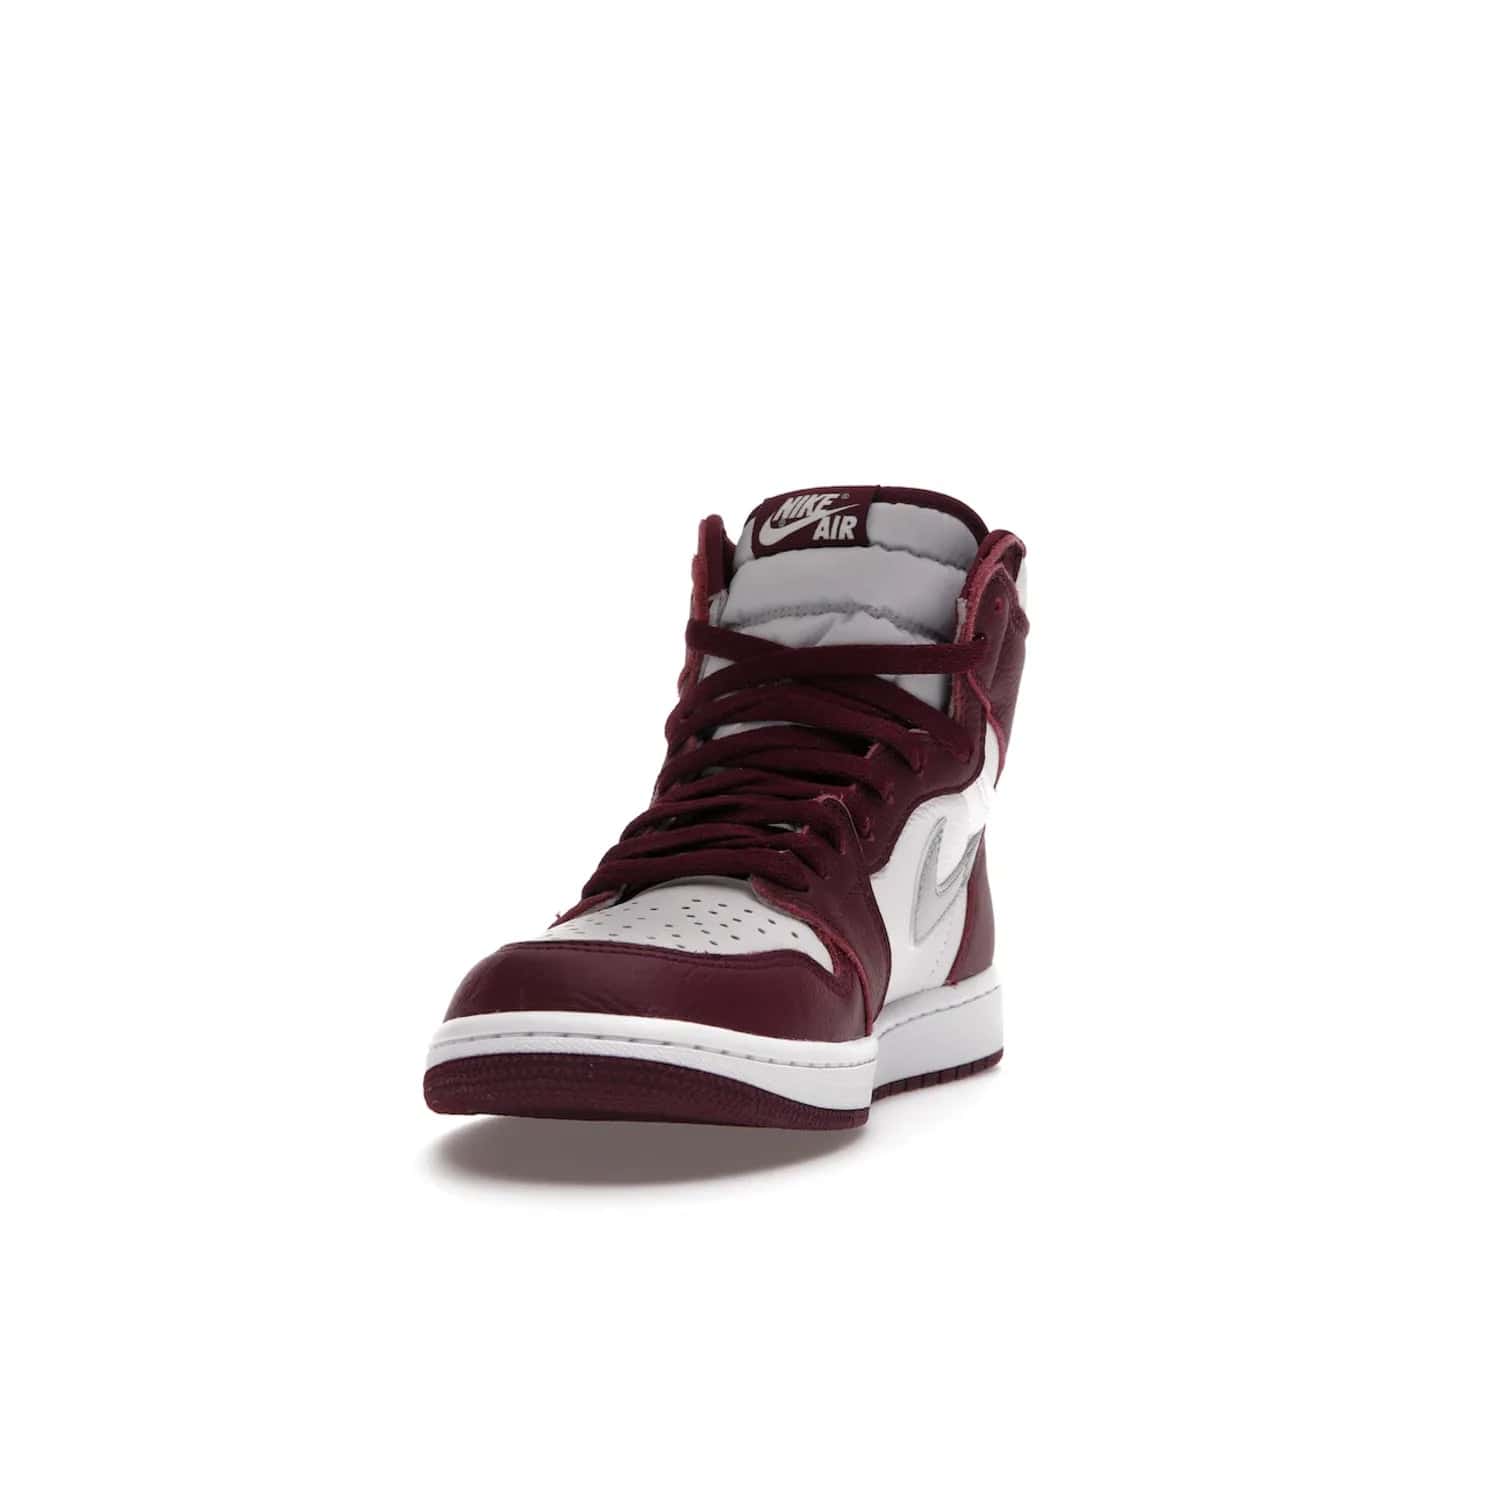 Jordan 1 Retro High OG Bordeaux - Image 12 - Only at www.BallersClubKickz.com - Shop the classic Air Jordan 1 High Bordeaux with a modern high-top cut. The timeless Bordeaux and White-Metallic Silver colorway, releasing Nov 20, 2021, is perfect for practice or a night out.